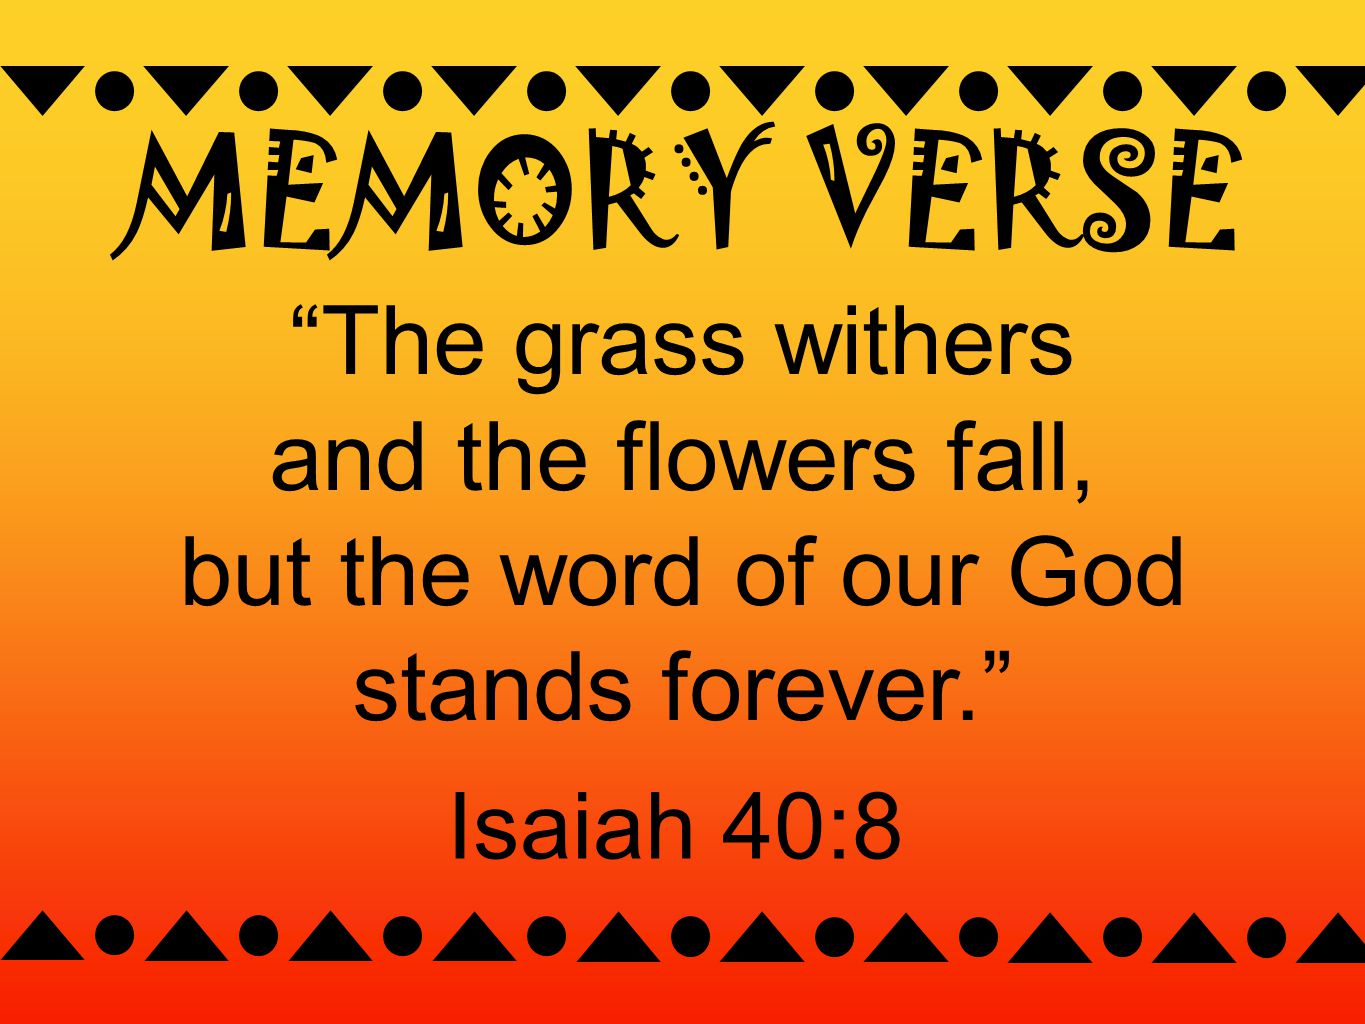 MEMORY VERSE The grass withers and the flowers fall, but the word of our God stands forever. Isaiah 40:8